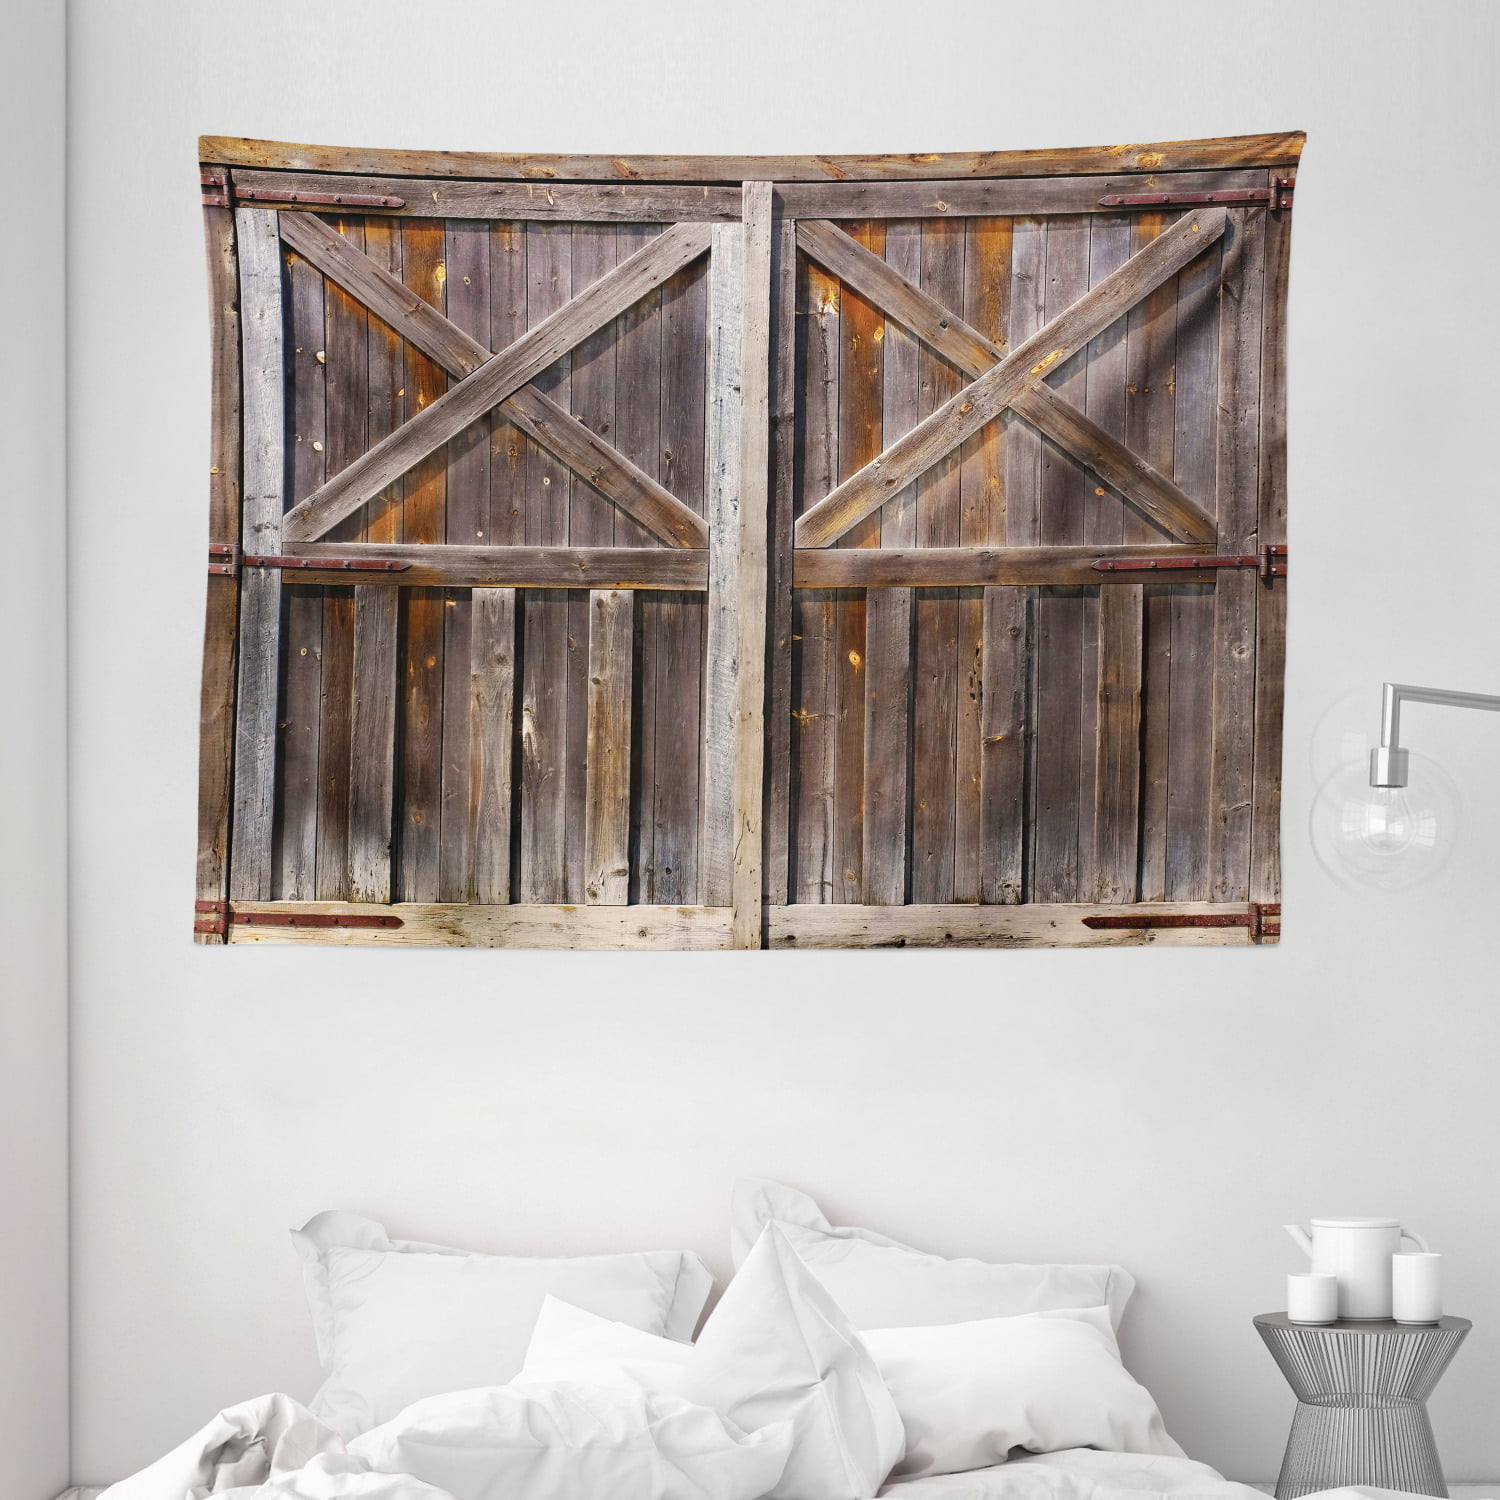 Rustic Barn Old Wooden Plank Wall Tapestry Wall Hanging Rug for Home Living Room 